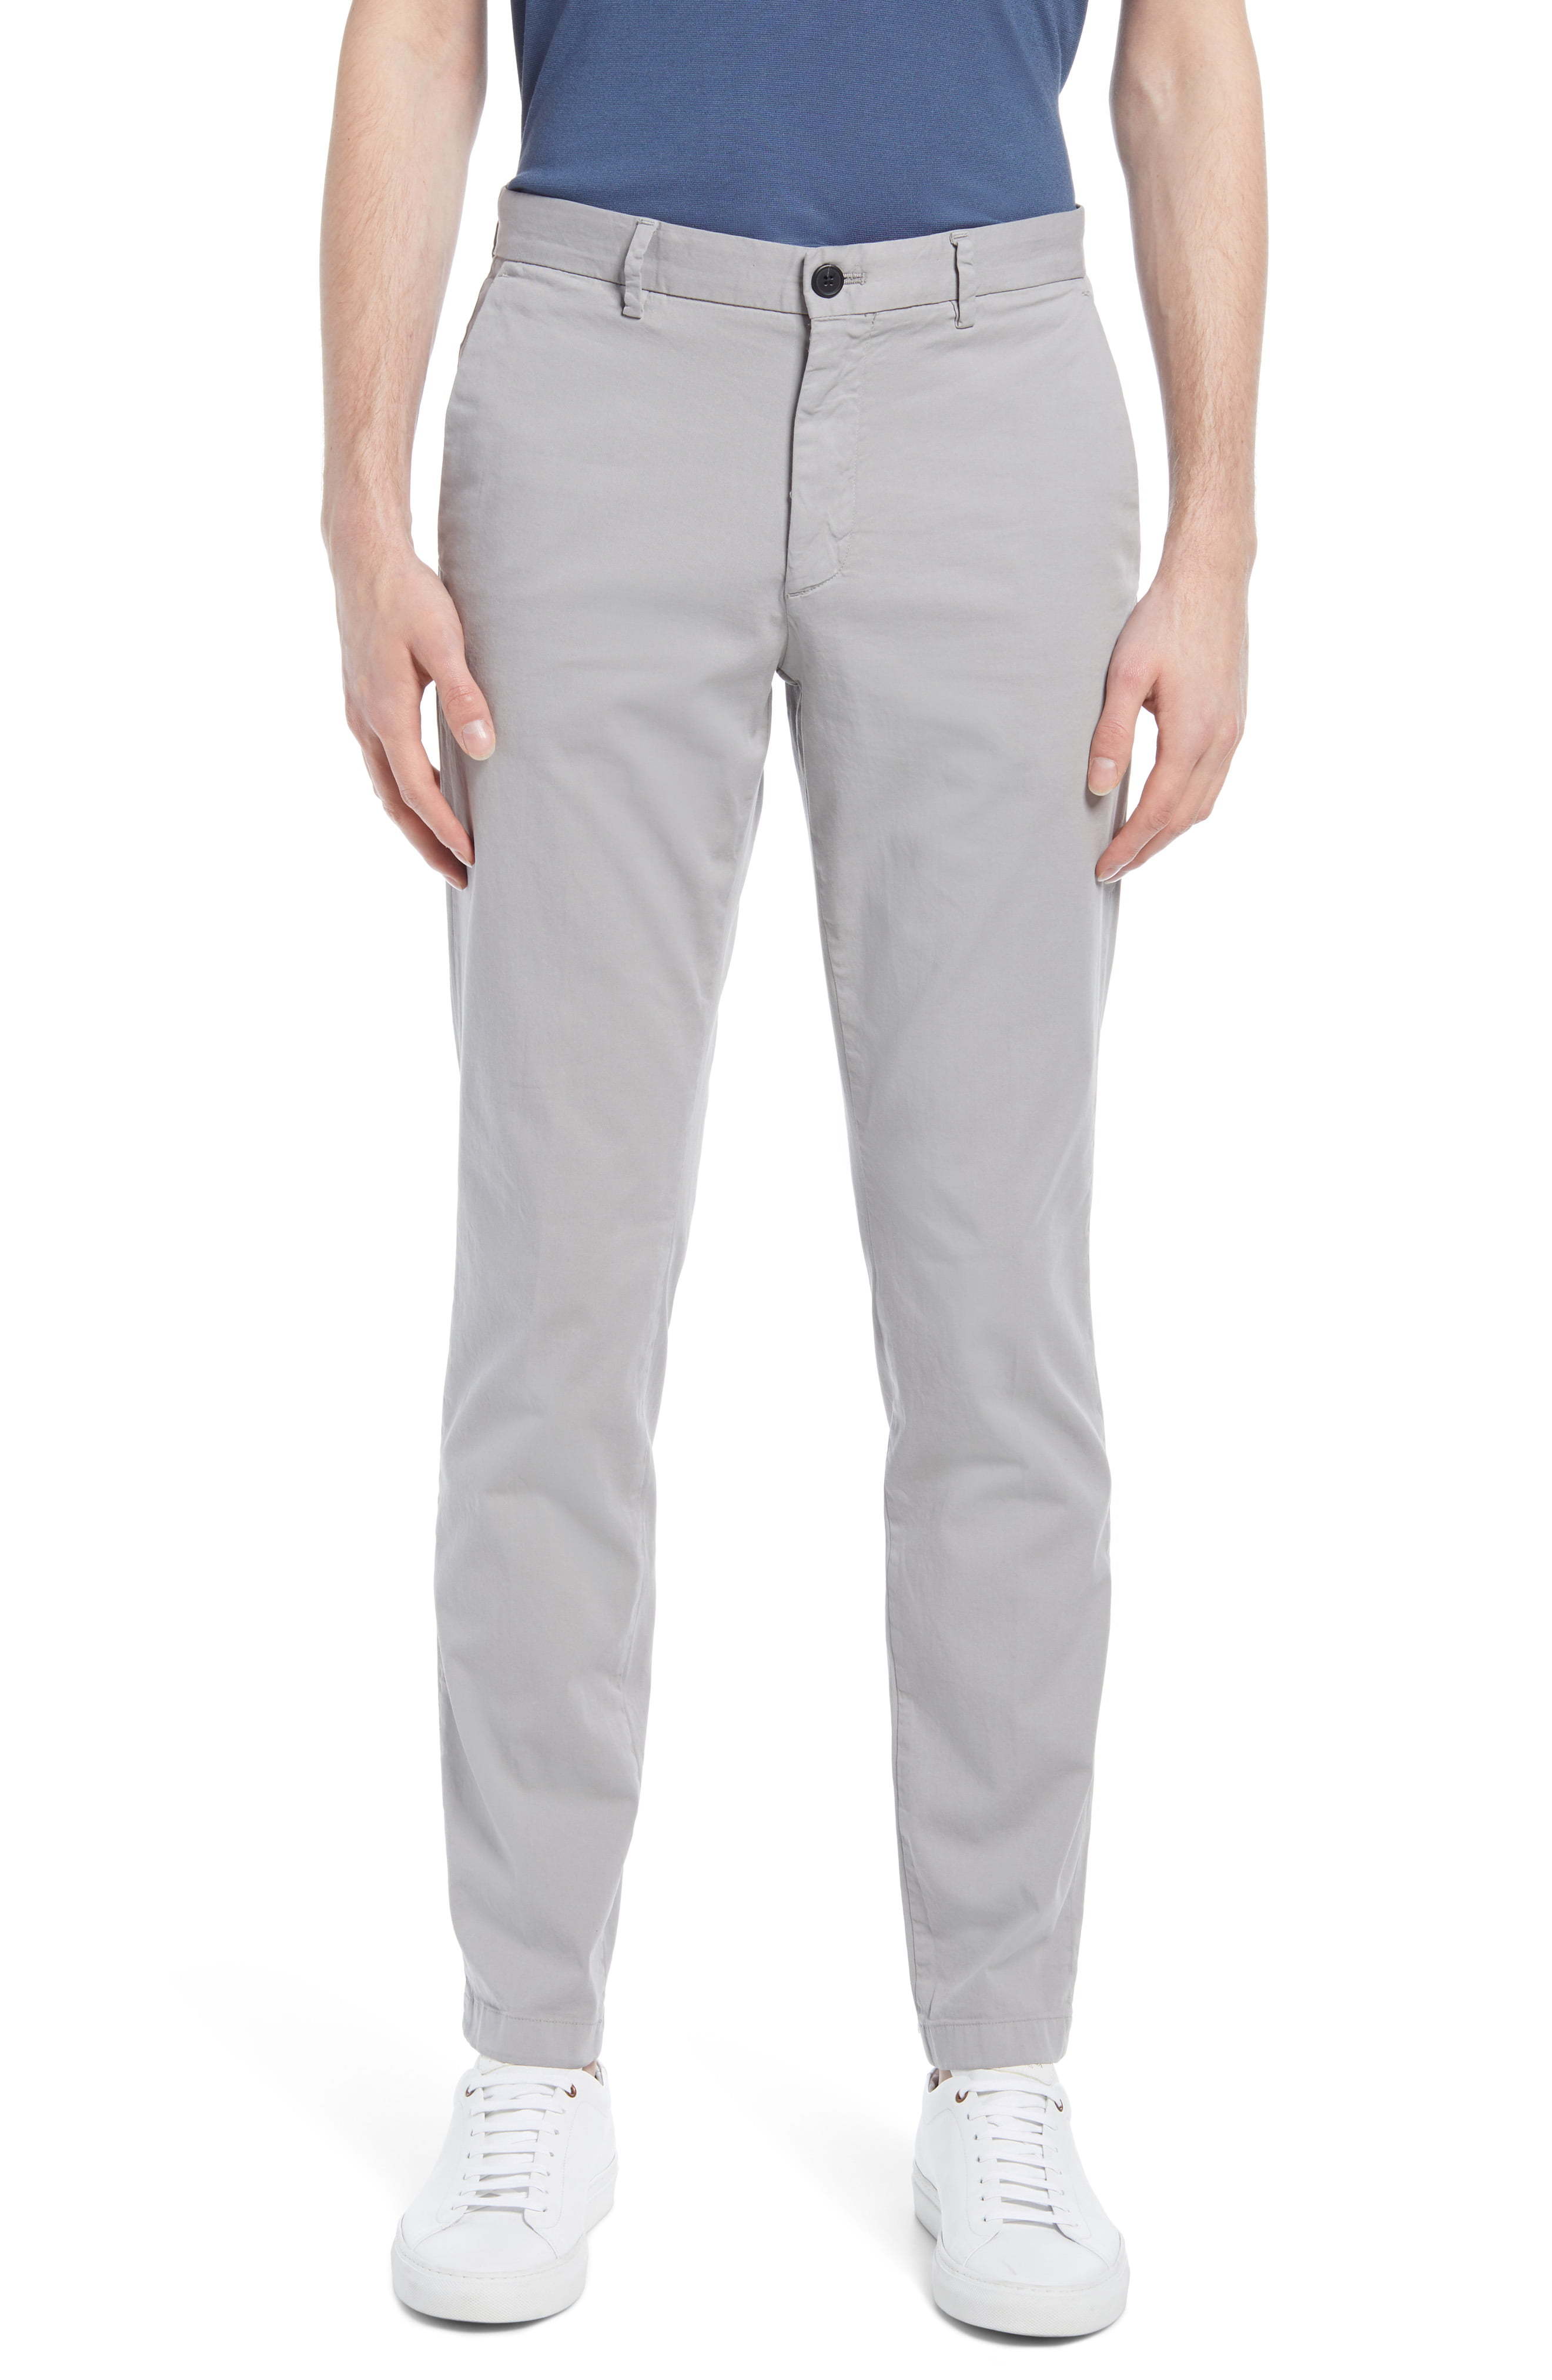 Theory Zaine Patton Slim Fit Pants, $175 | Nordstrom | Lookastic